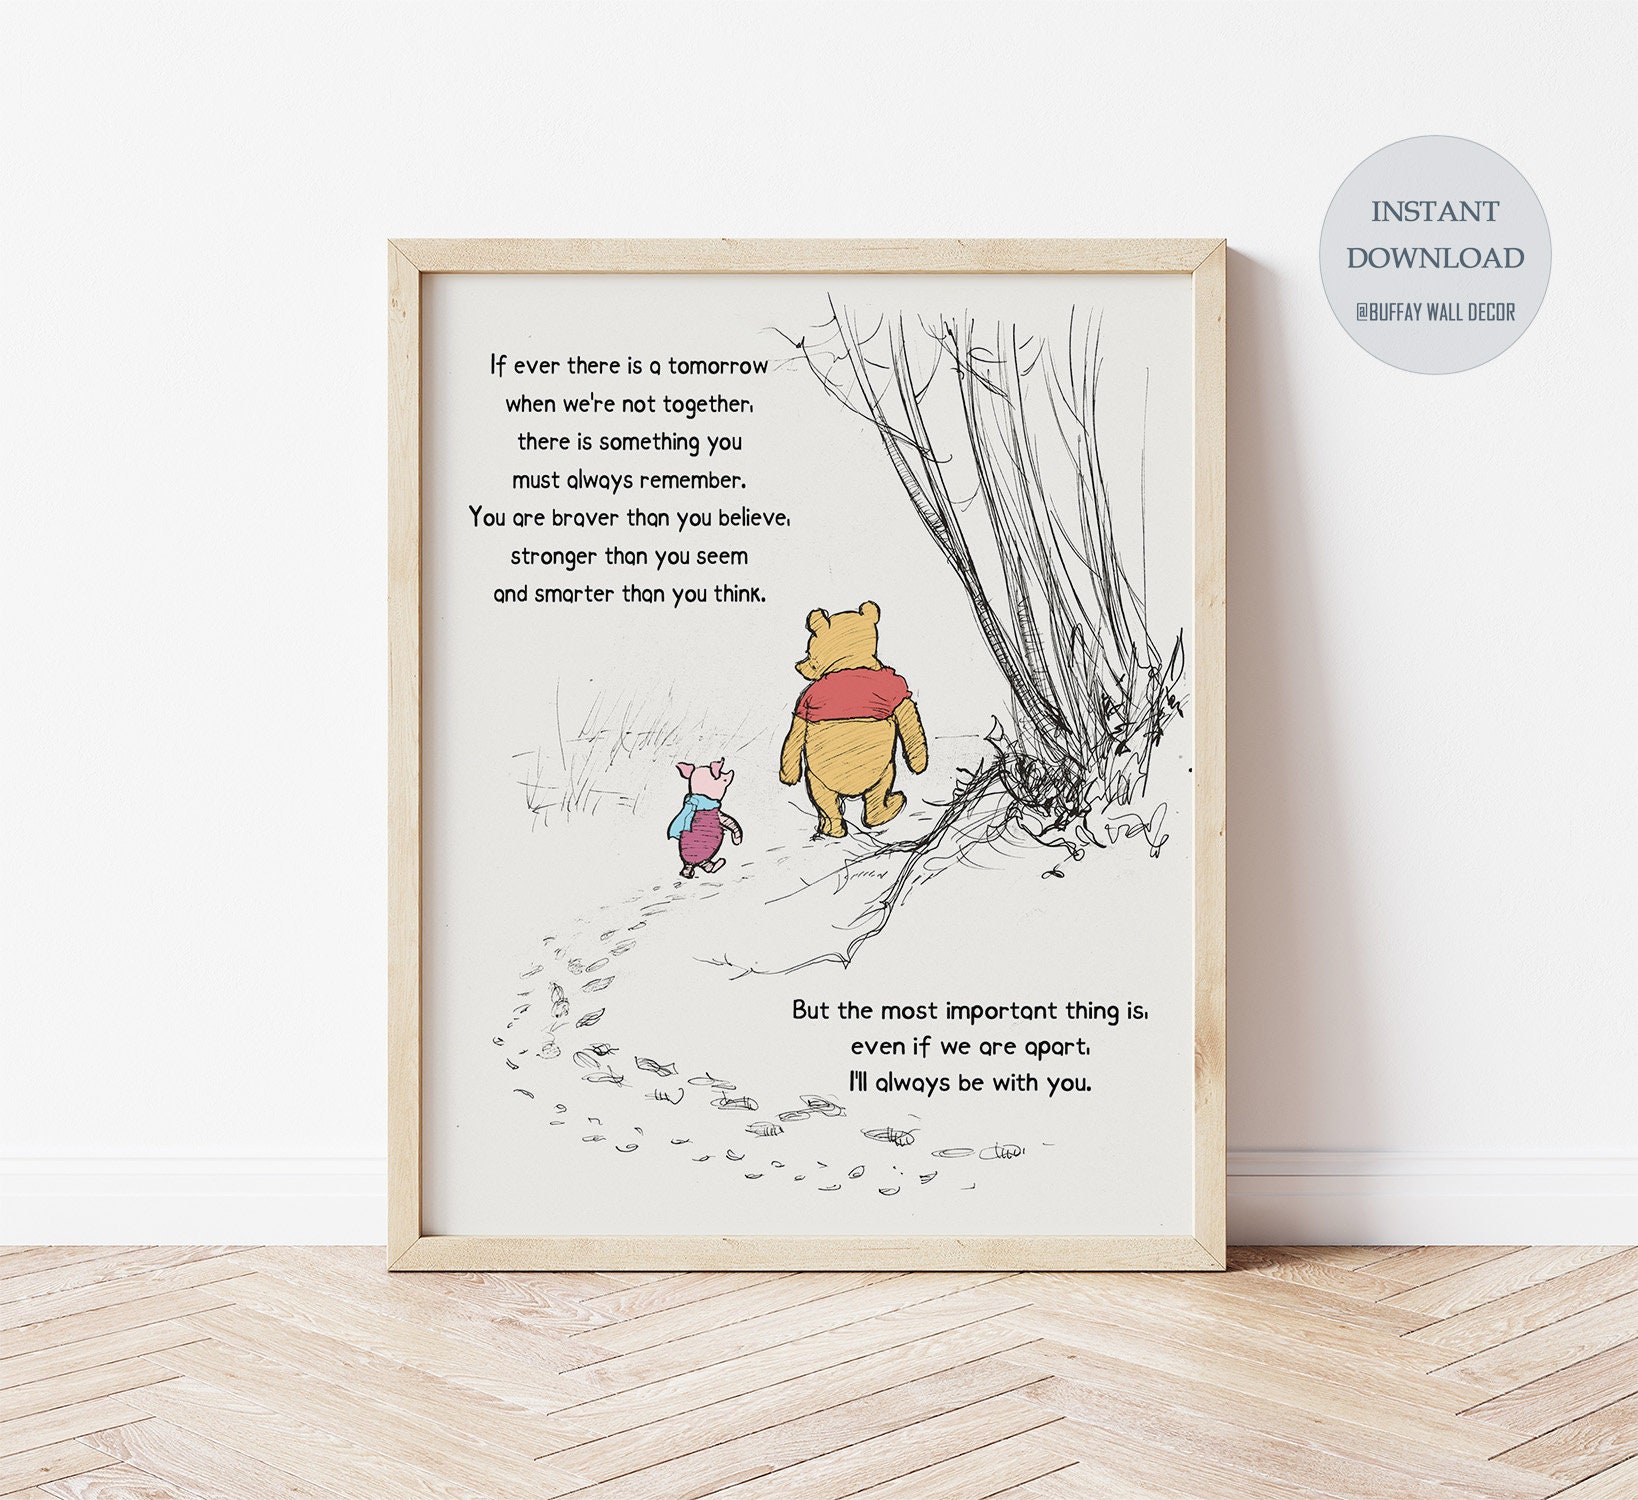 Winnie the Pooh Book Page Inspirational Wall Art, AA Milne Quote Vintage  Style Print Wall Decor